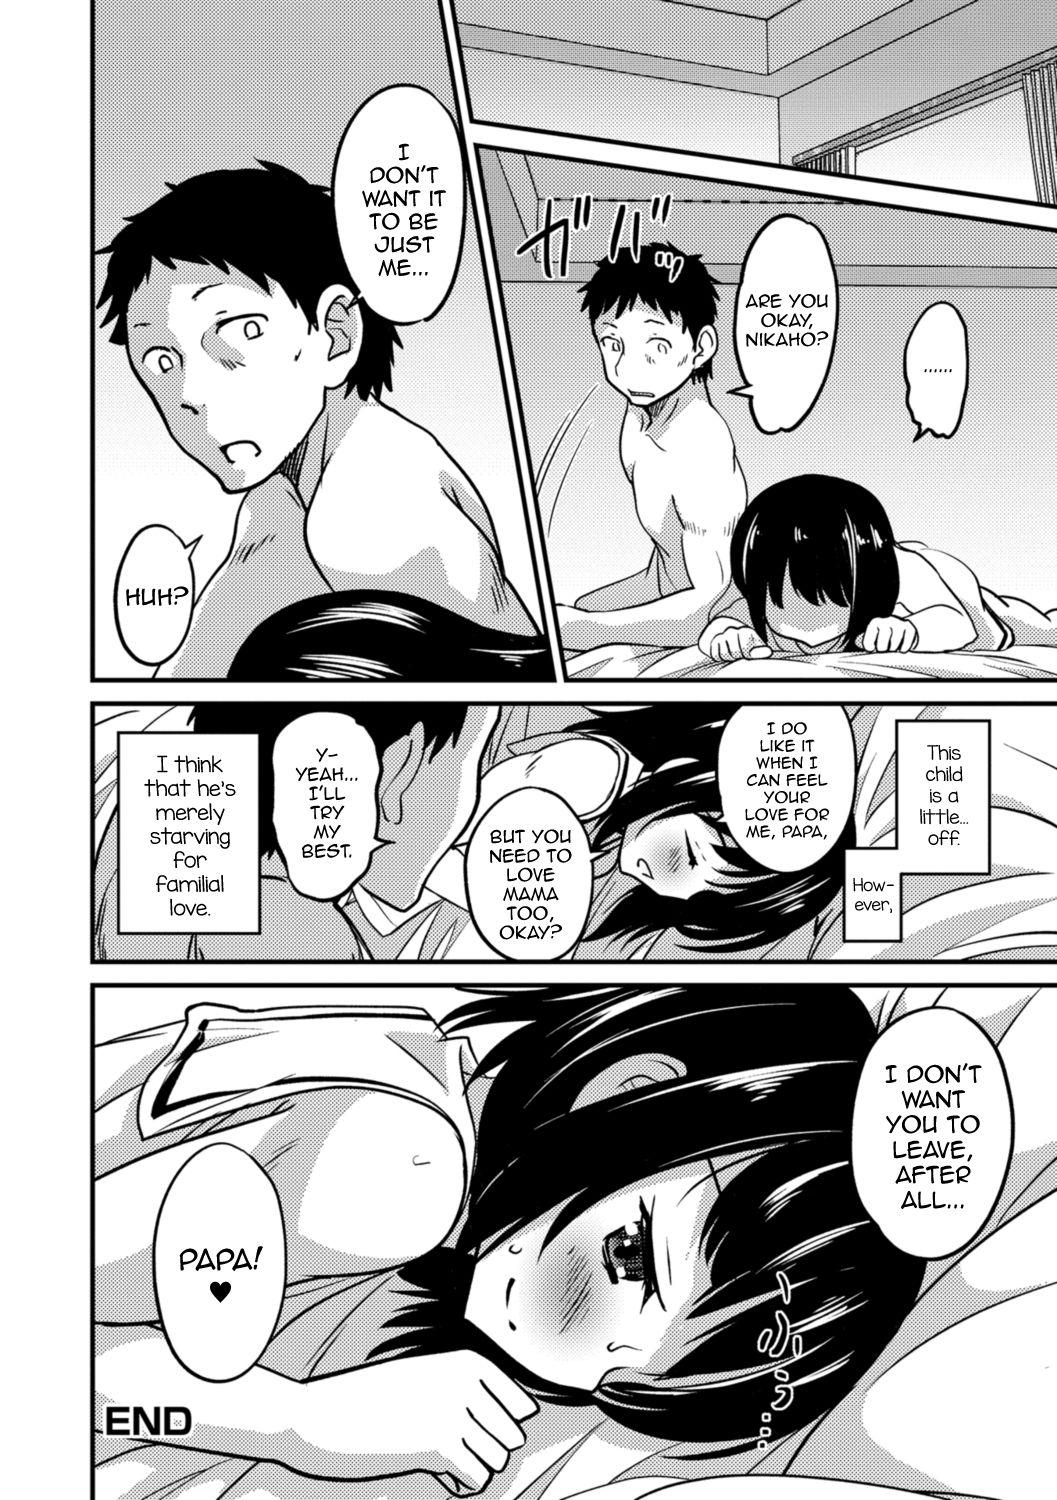 Exhib Kimi no Tsurego ni Koishiteru. | I'm in Love With Your Child From a Previous Marriage. Free Real Porn - Page 20